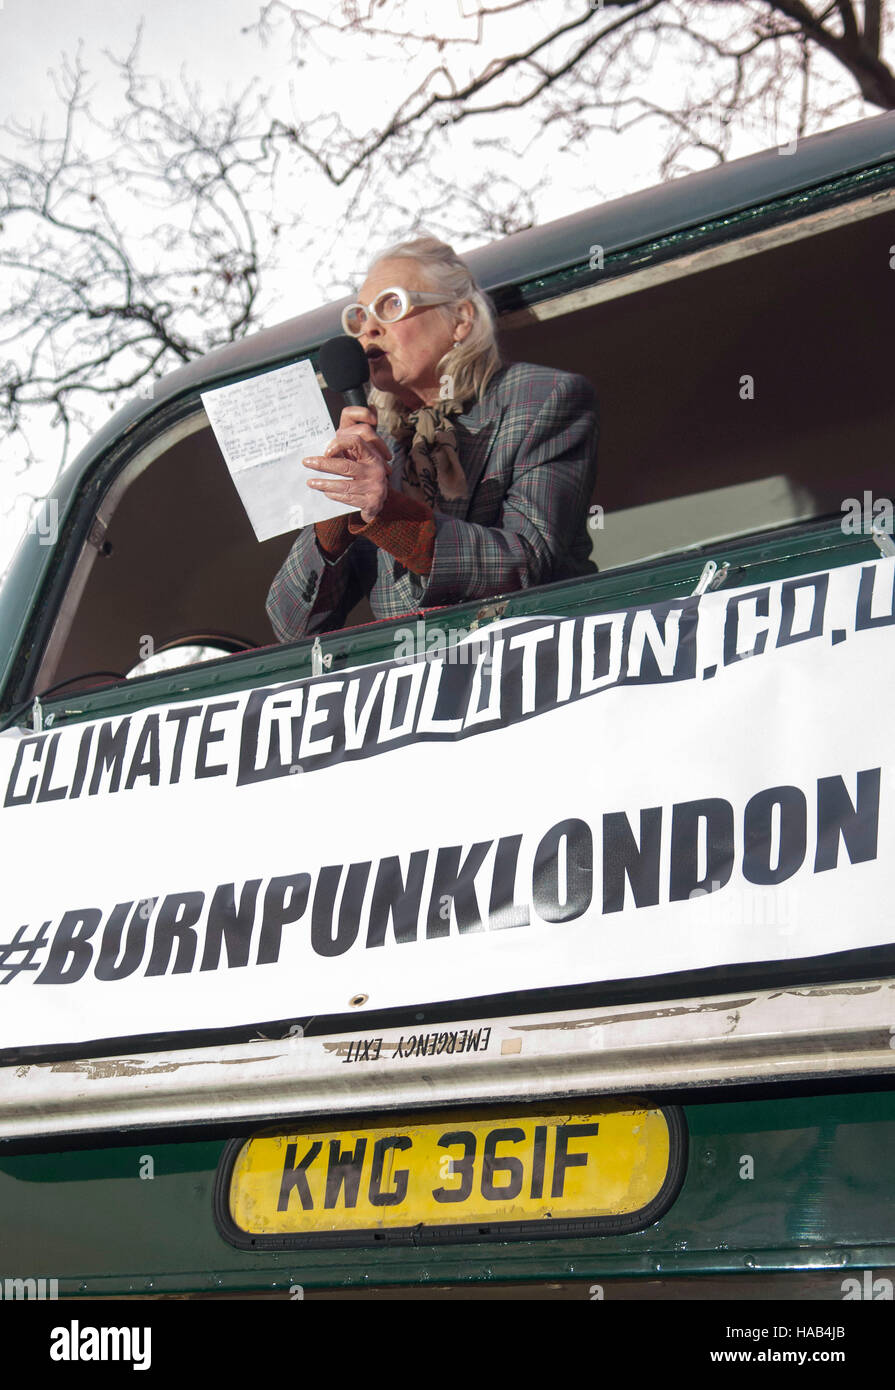 Fashion designer Dame Vivienne Westwood speaking after her son Joe Corre burned his £5 million pound collection of punk memorabilia in protest to declare 'punk is dead'. The burning took place on a barge on Chelsea Embankment. Stock Photo